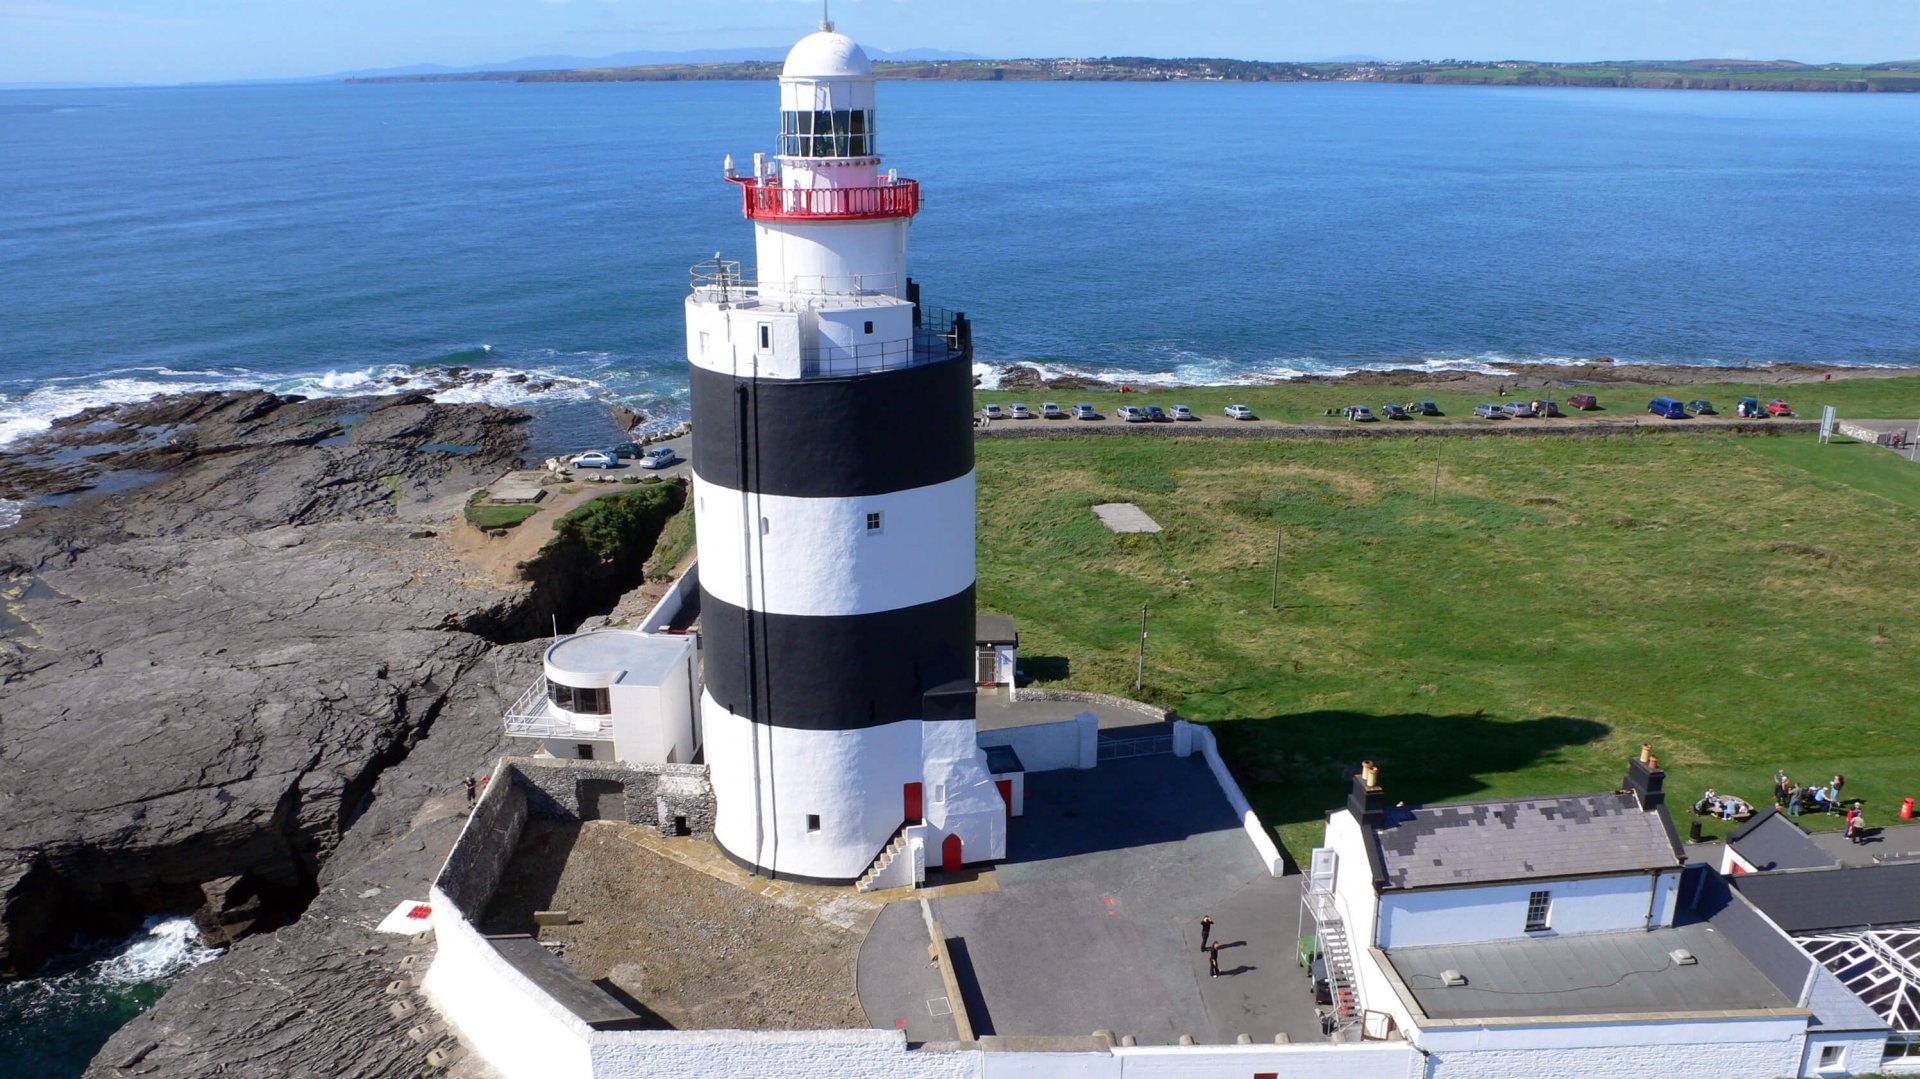 Hook head lighthouse in Wexford